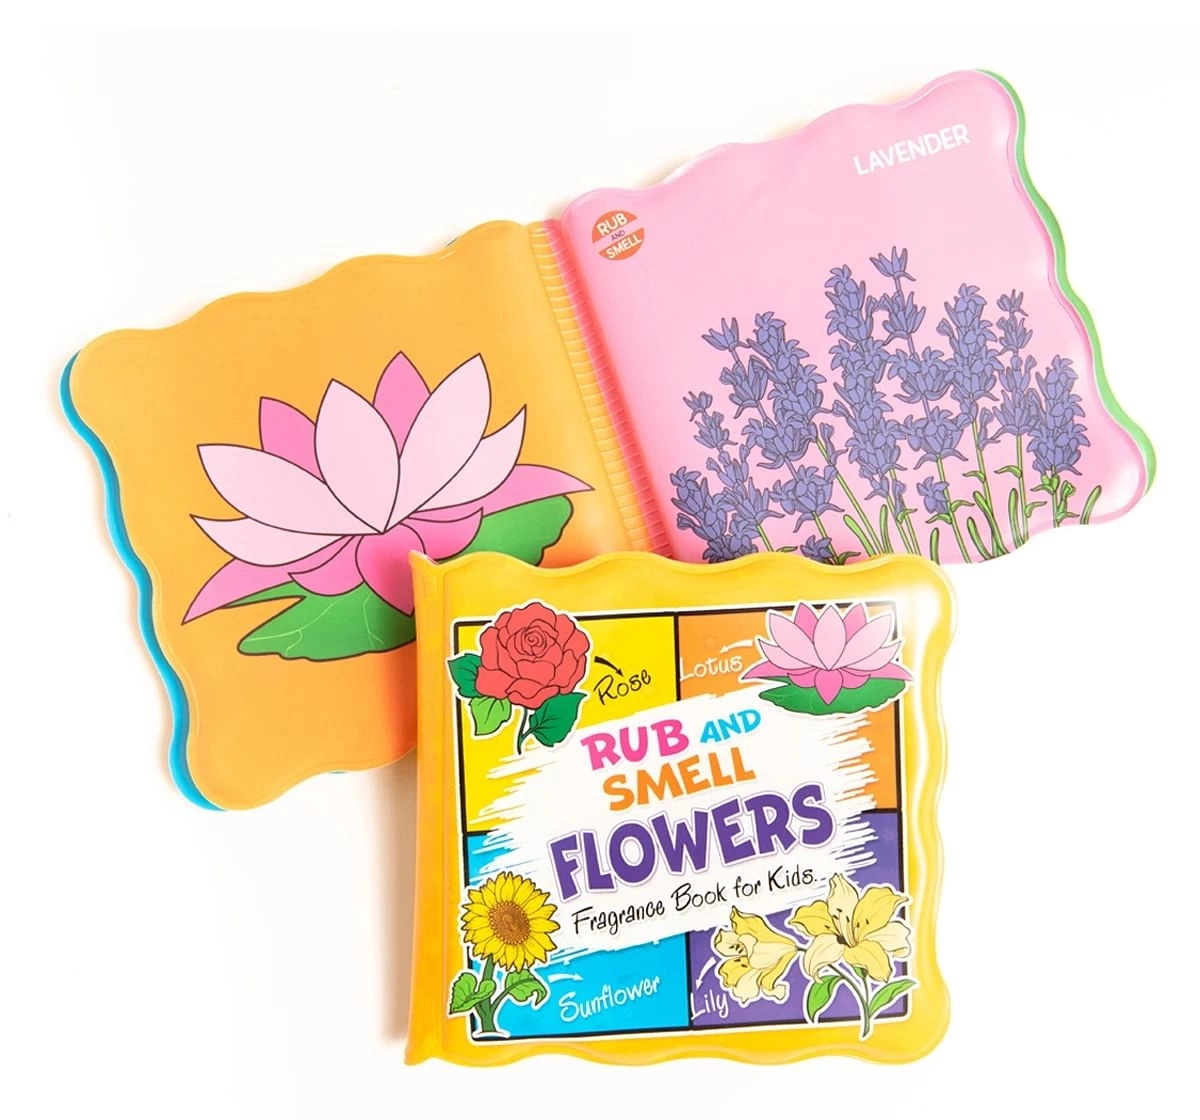 Dreamland Rub and Smell Flowers Books for Kids 3Y+, Multicolour